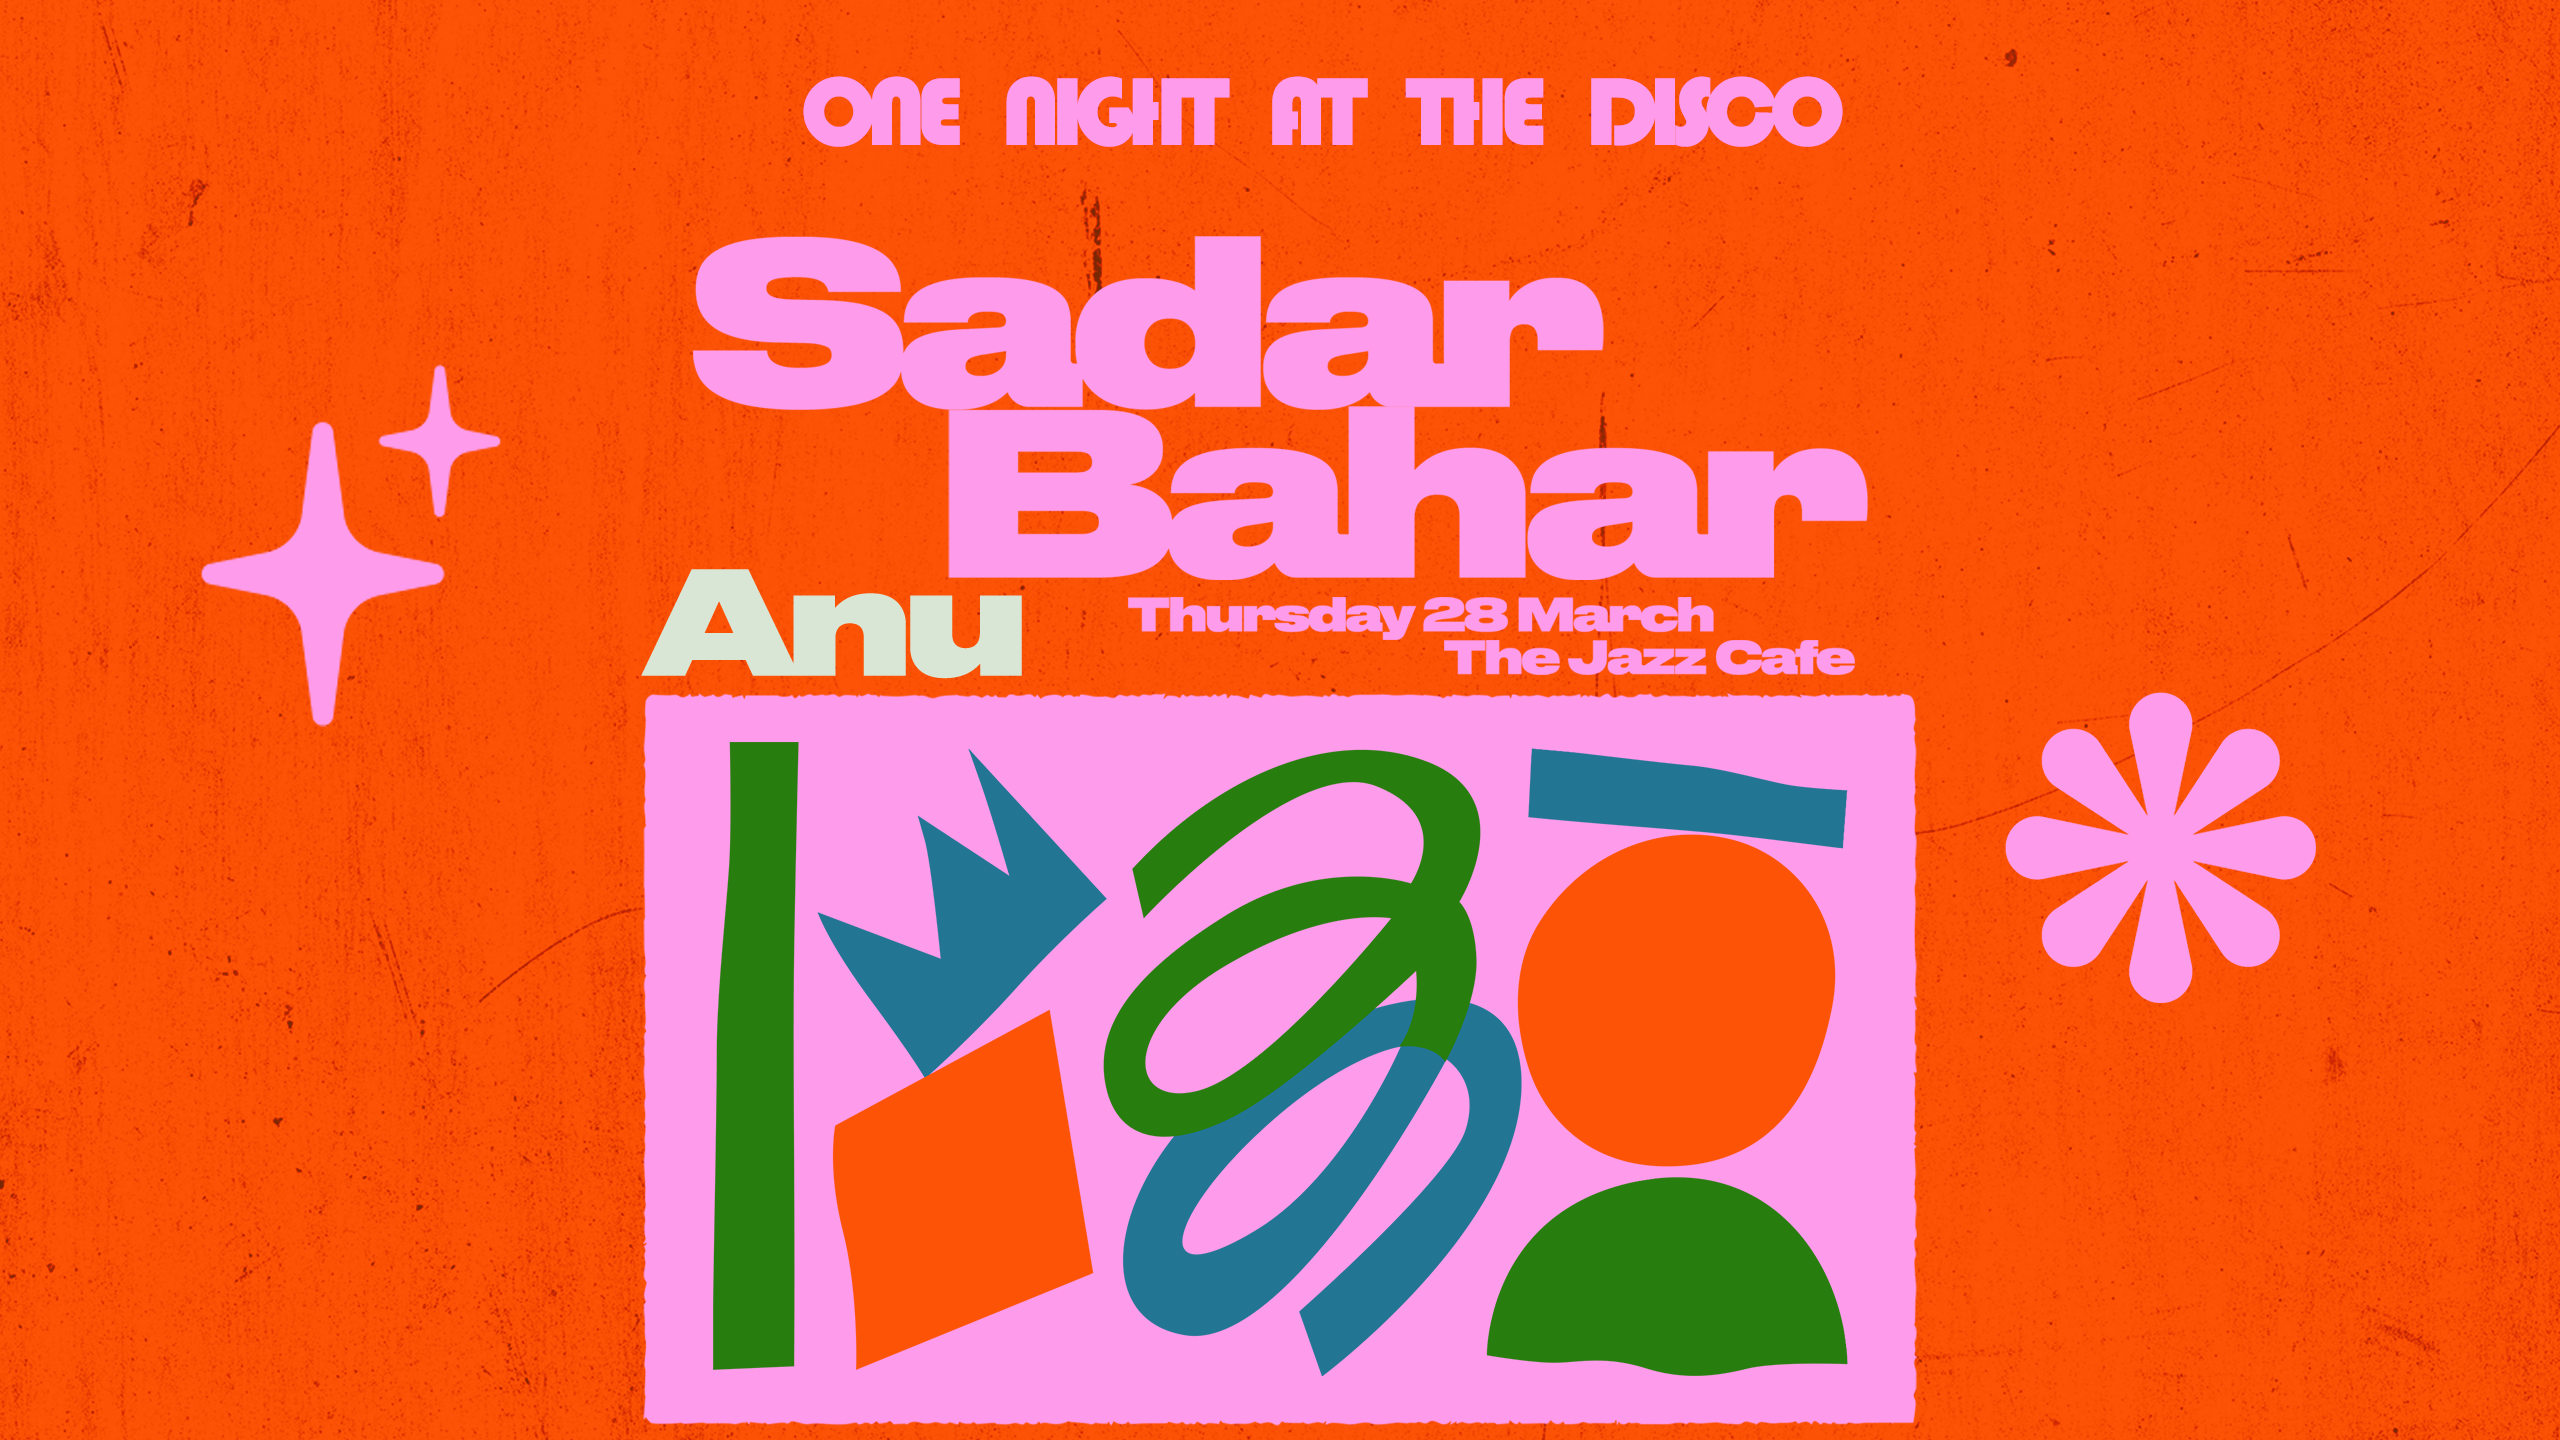 One Night at the Disco with Sadar Bahar - Easter Bank Holiday Thursday  - フライヤー表